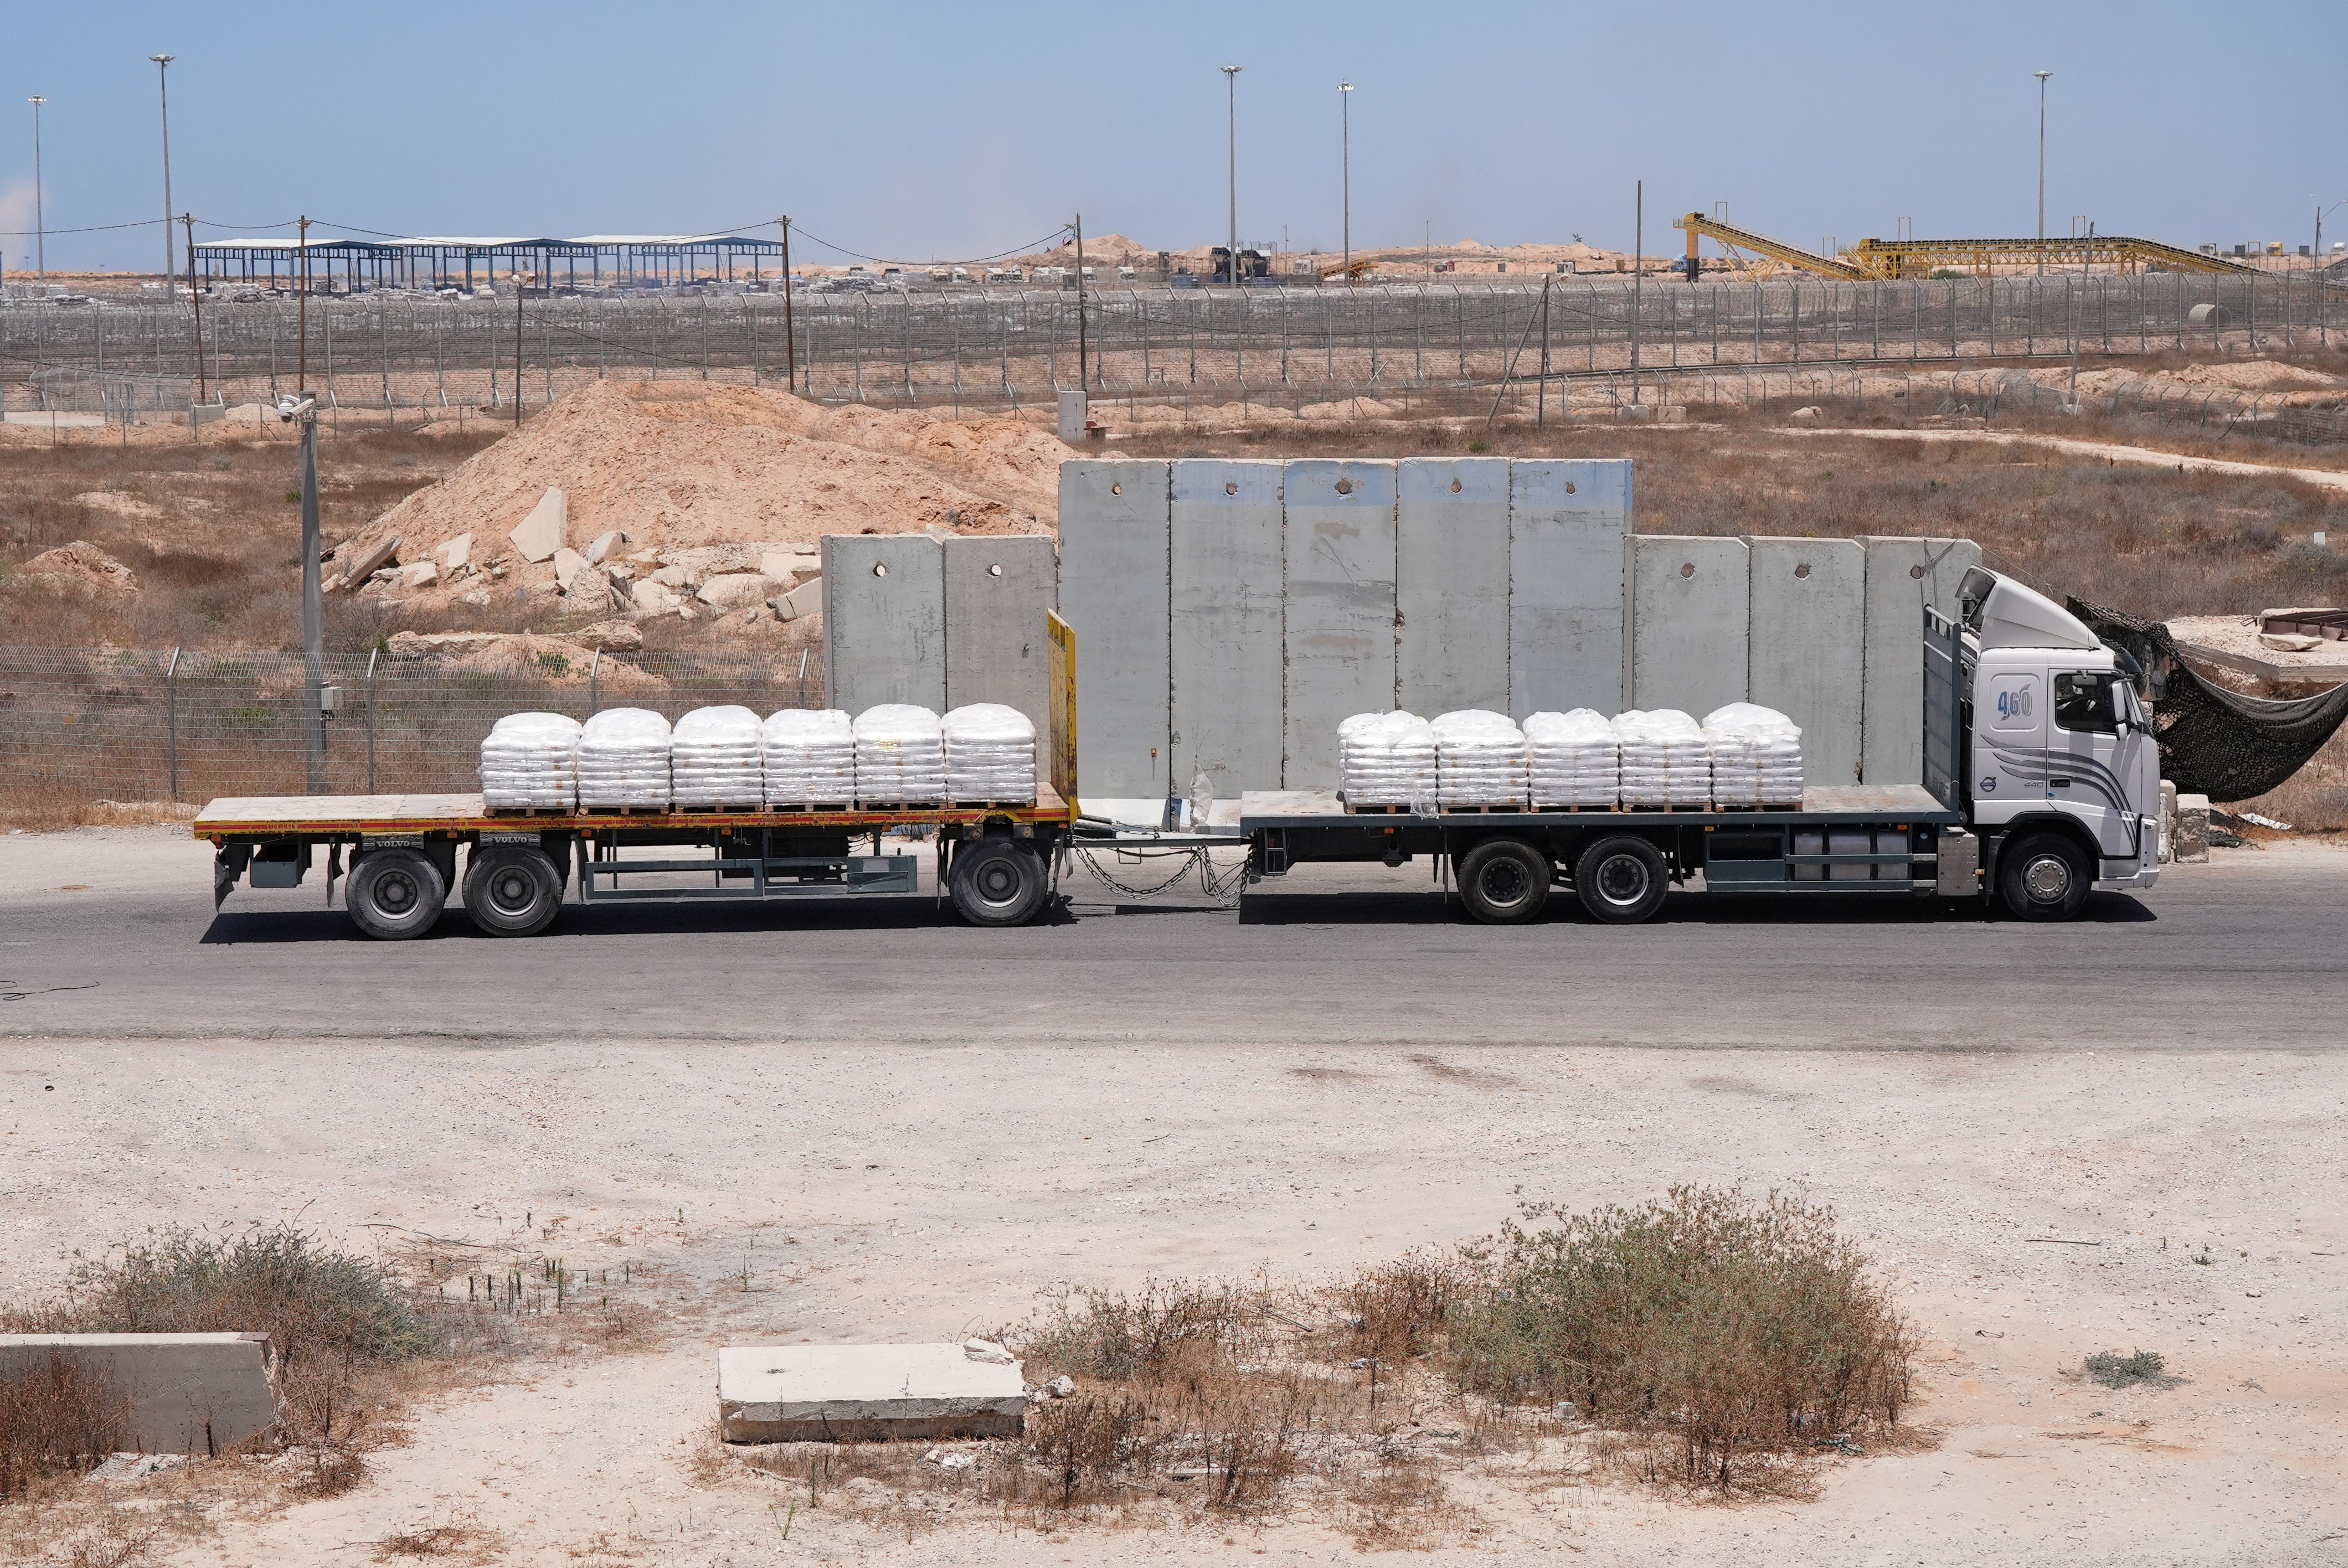 A truck carrying aid for delivery into Gaza drives through the Kerem Shalom crossing in southern Israel